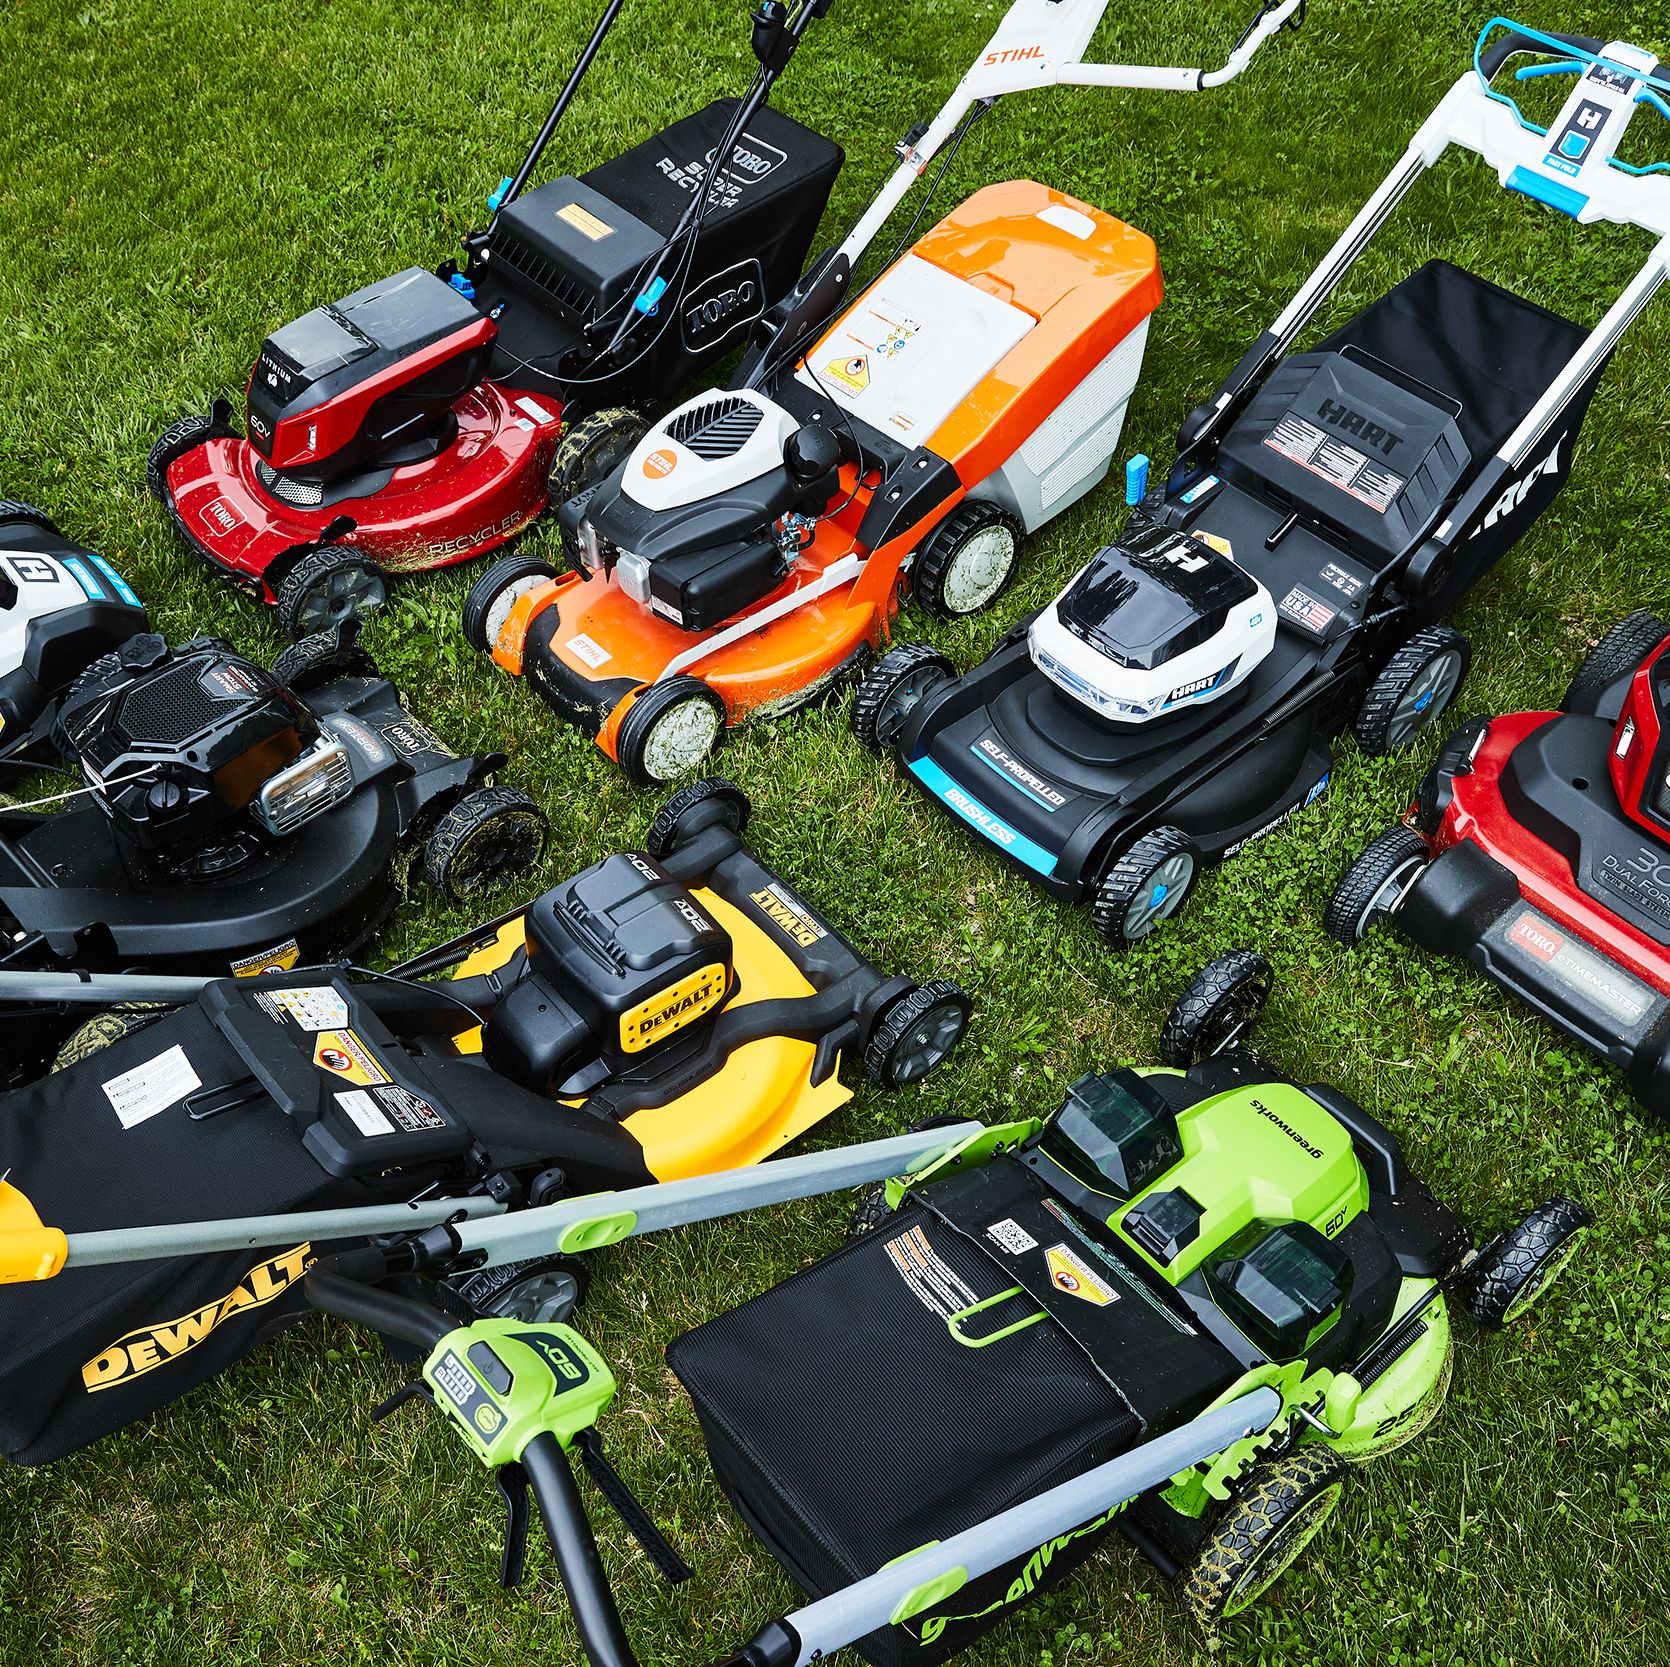 Make Your Yard Work Easier With These Expert-Recommended Self-Propelled Lawnmowers